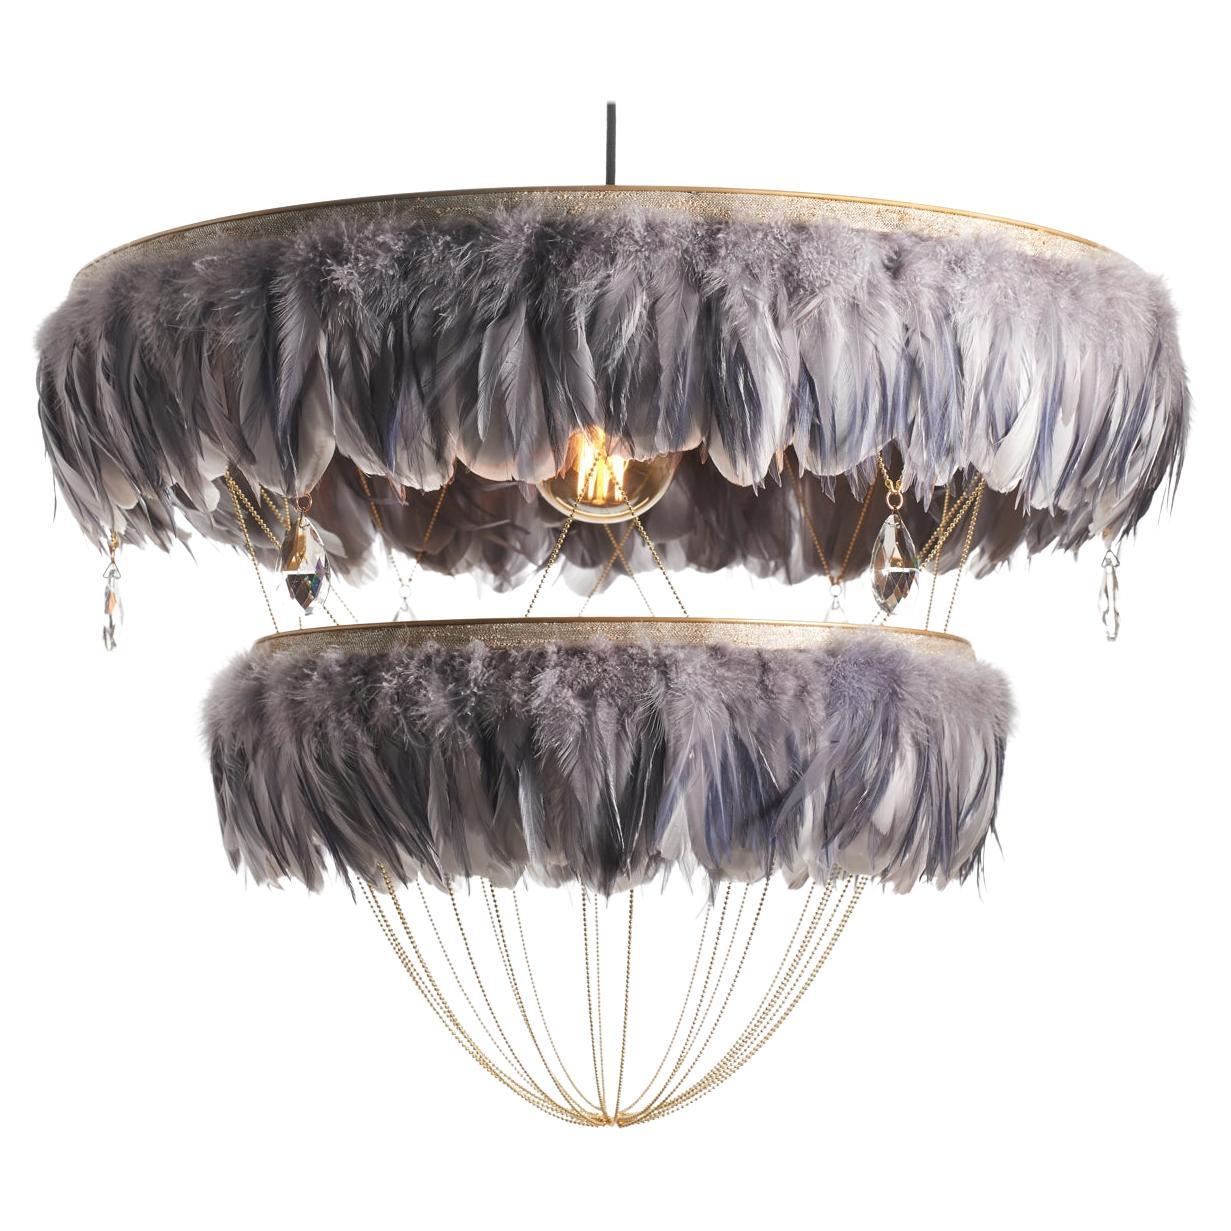 Feather Chandelier in Two Tone Grey - Bertie -  Hand Made to order in London.  For Sale